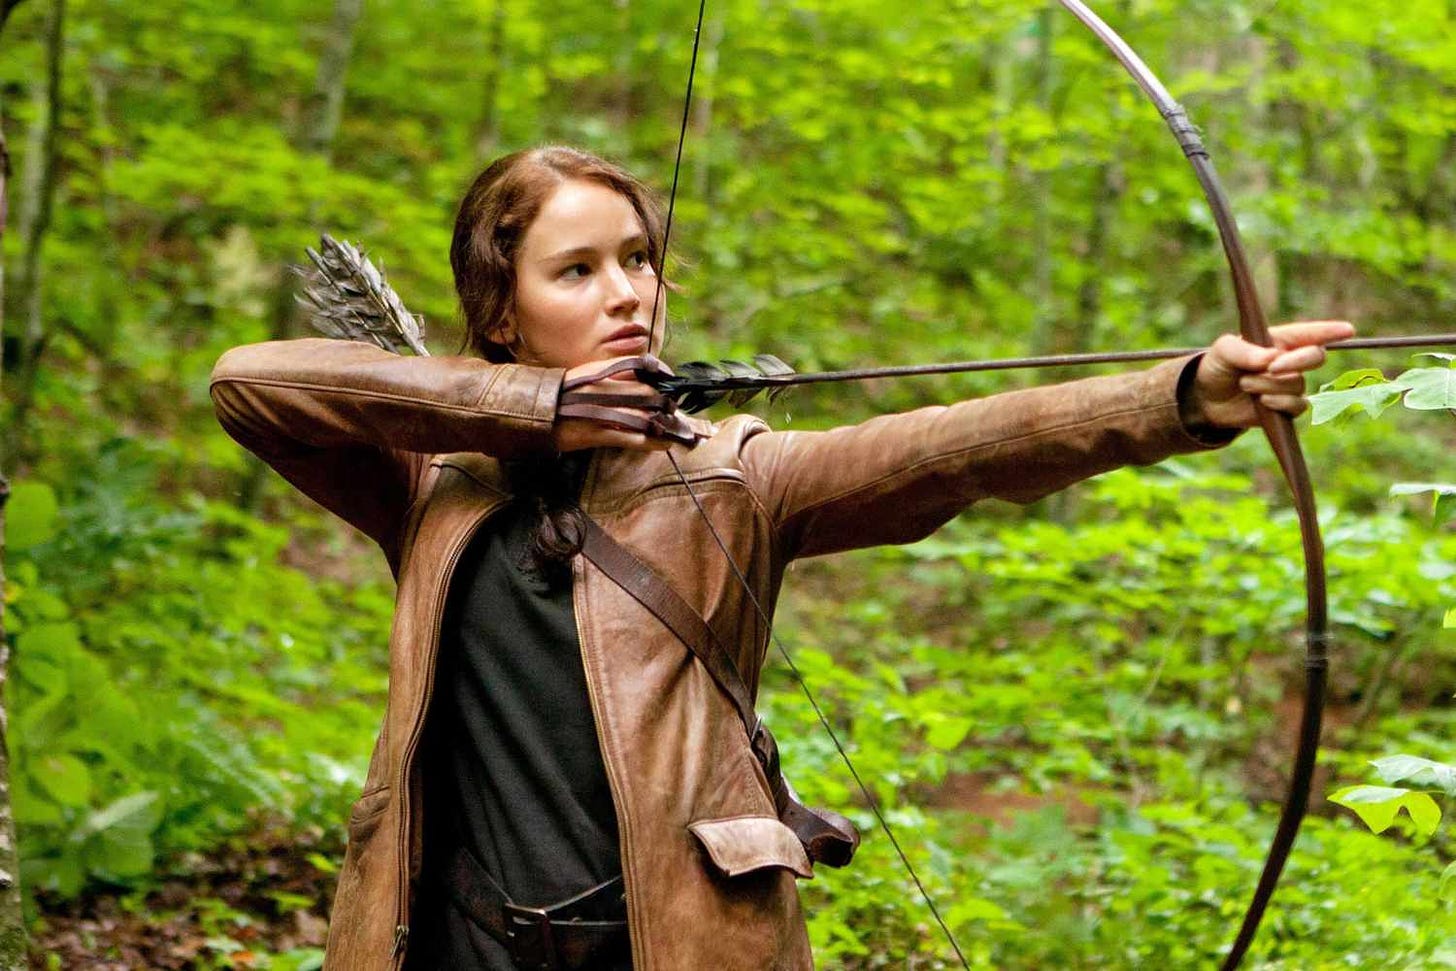 The Hunger Games gets special 10th anniversary covers, new content